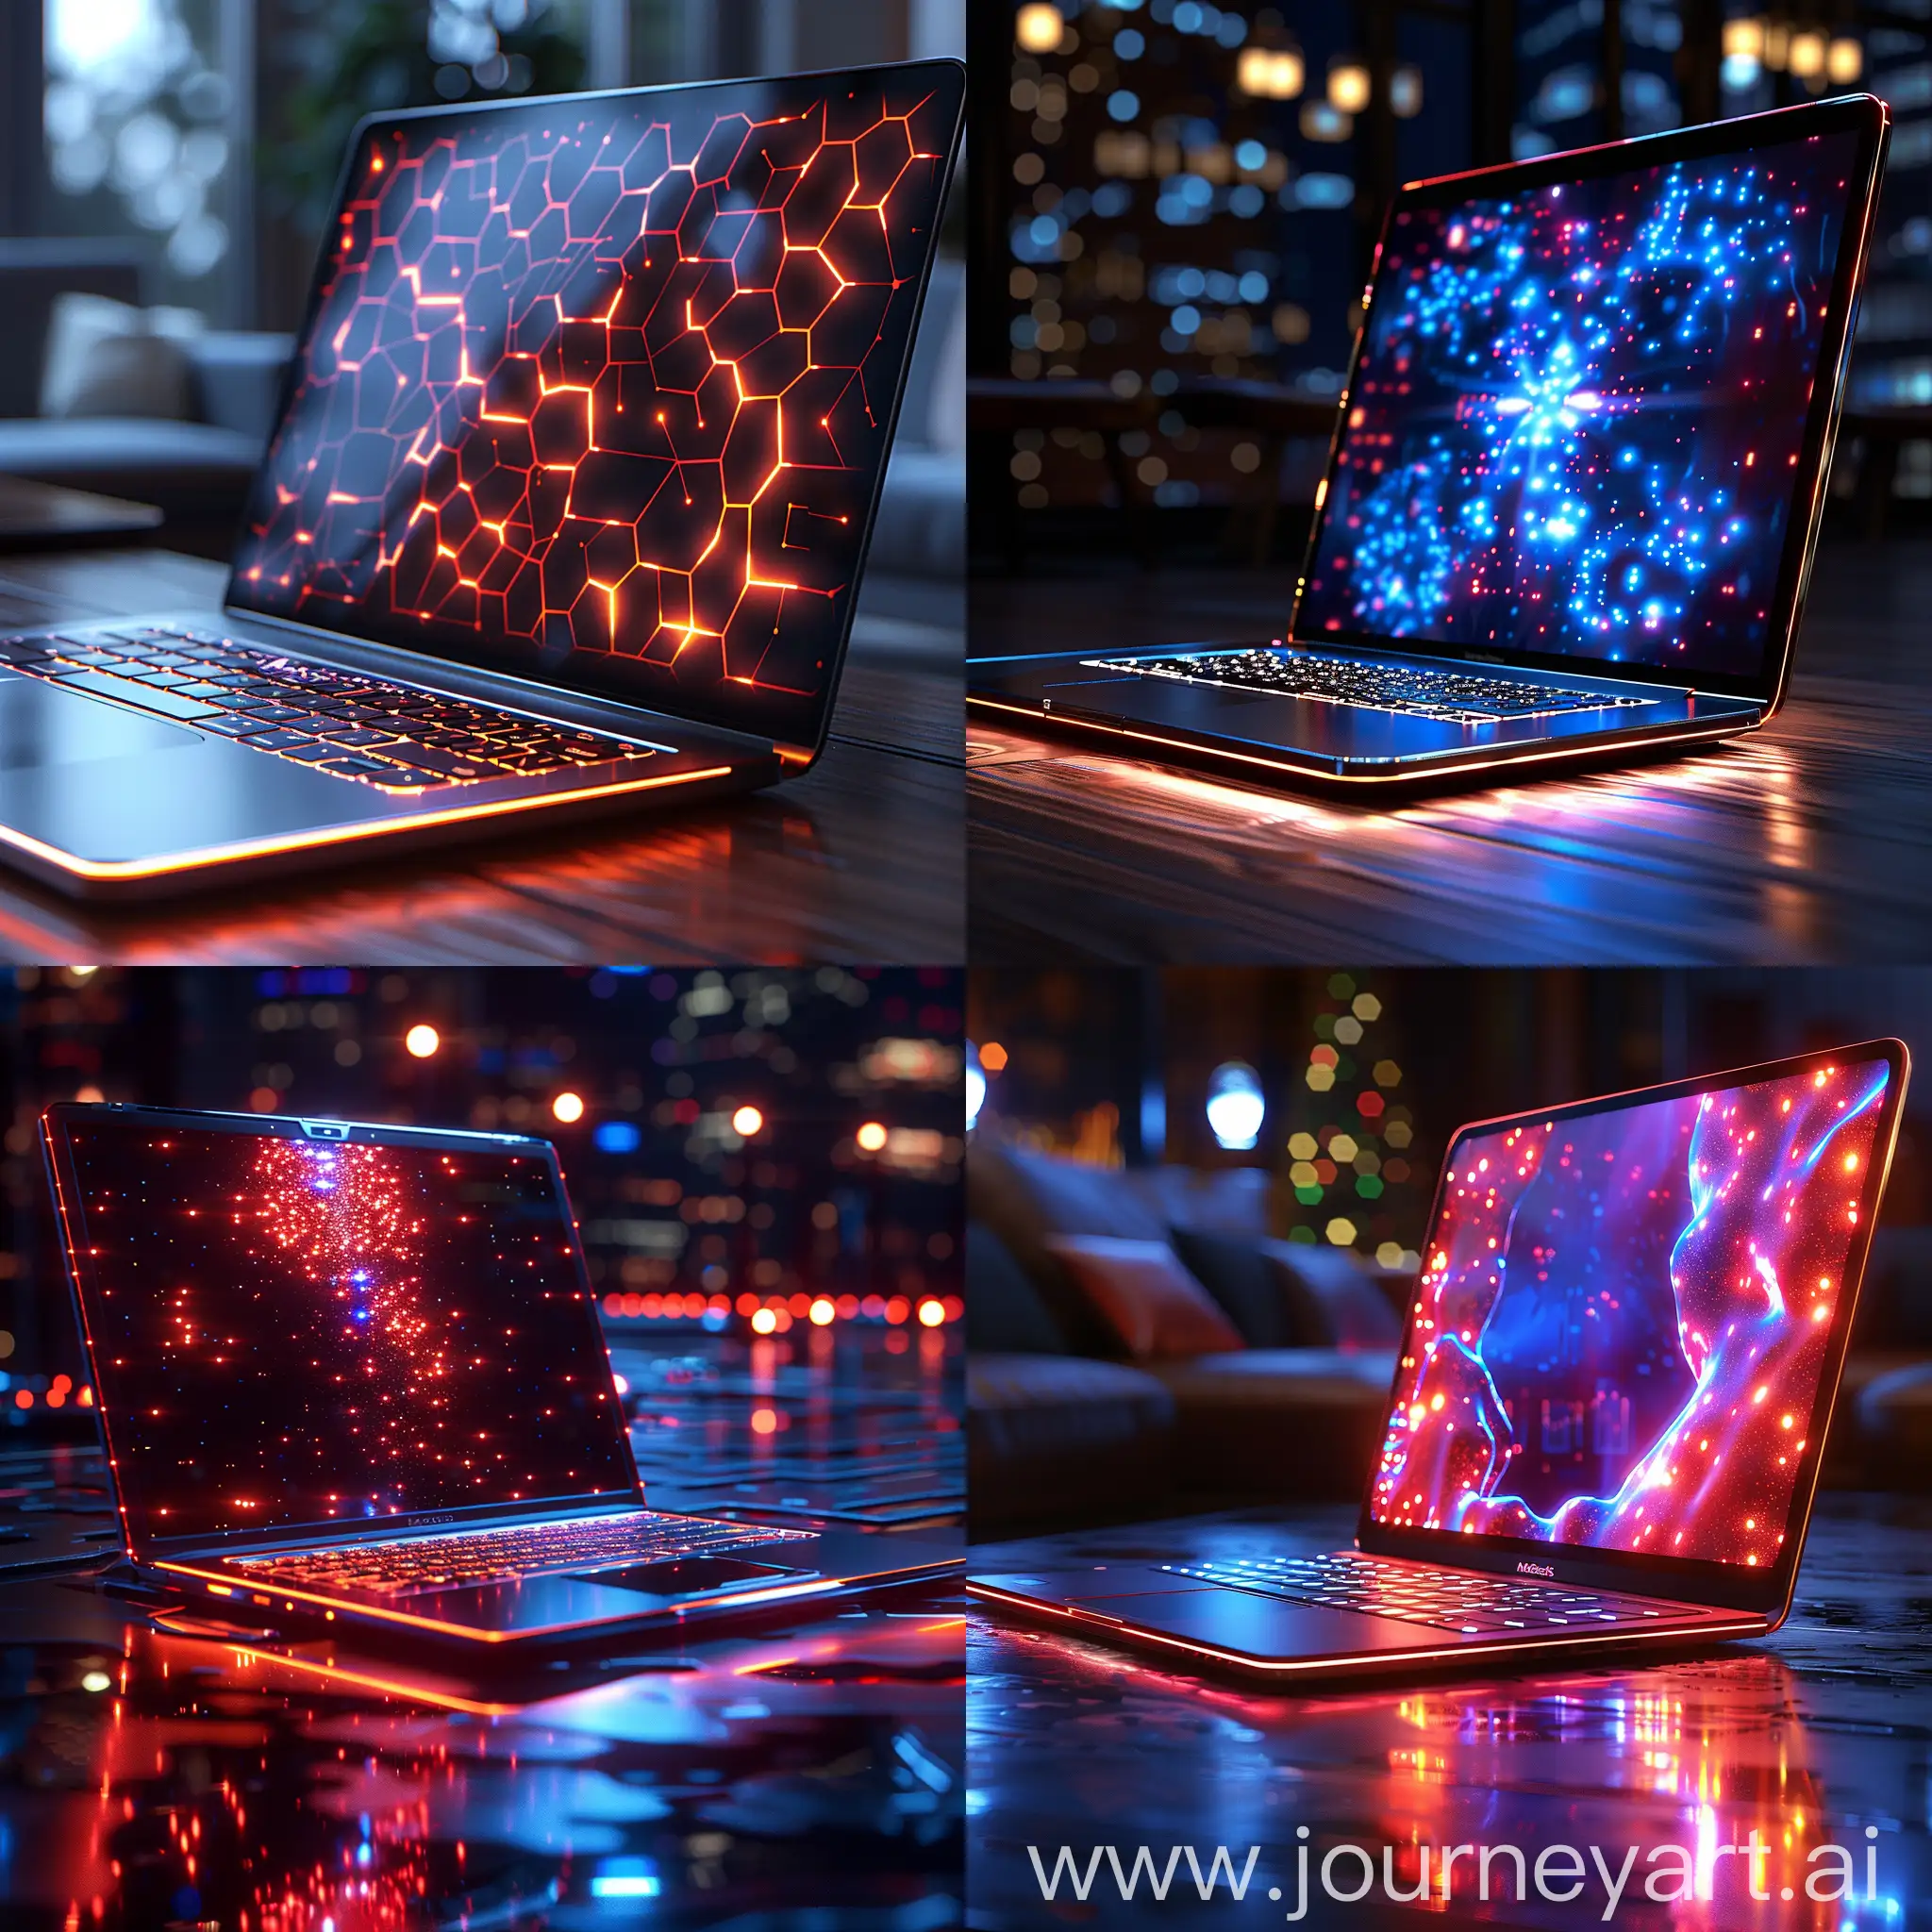 Futuristic-Laptop-with-Graphene-Holographic-Projections